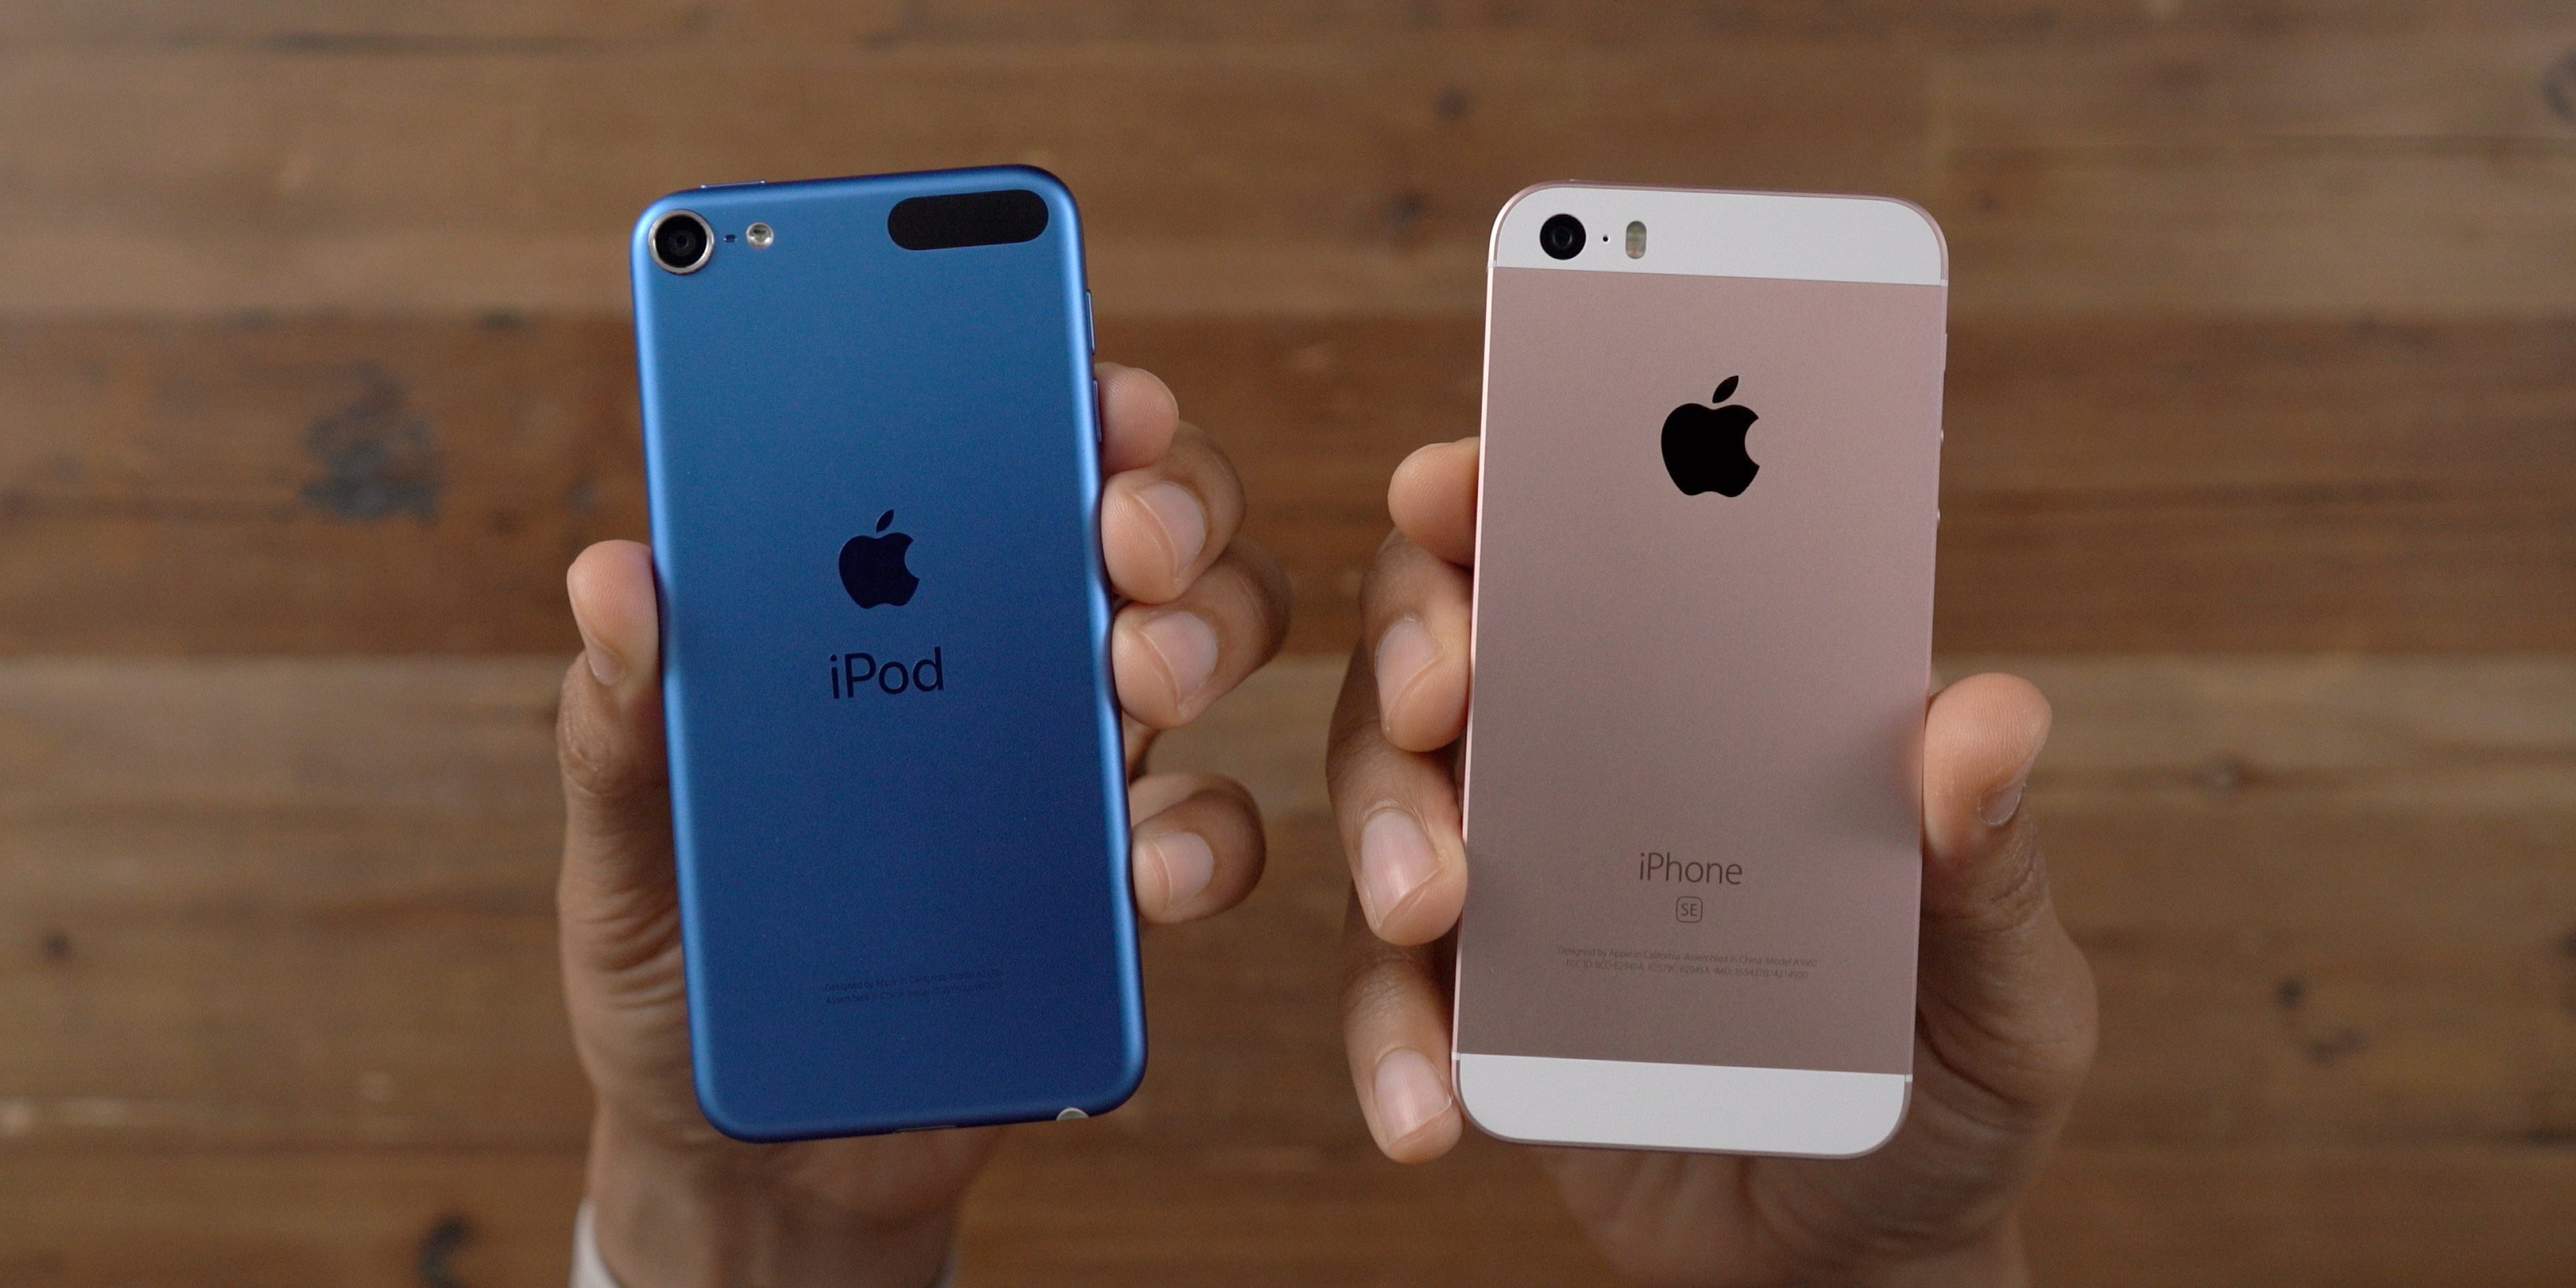 Camera Review – iPod VS iPhone